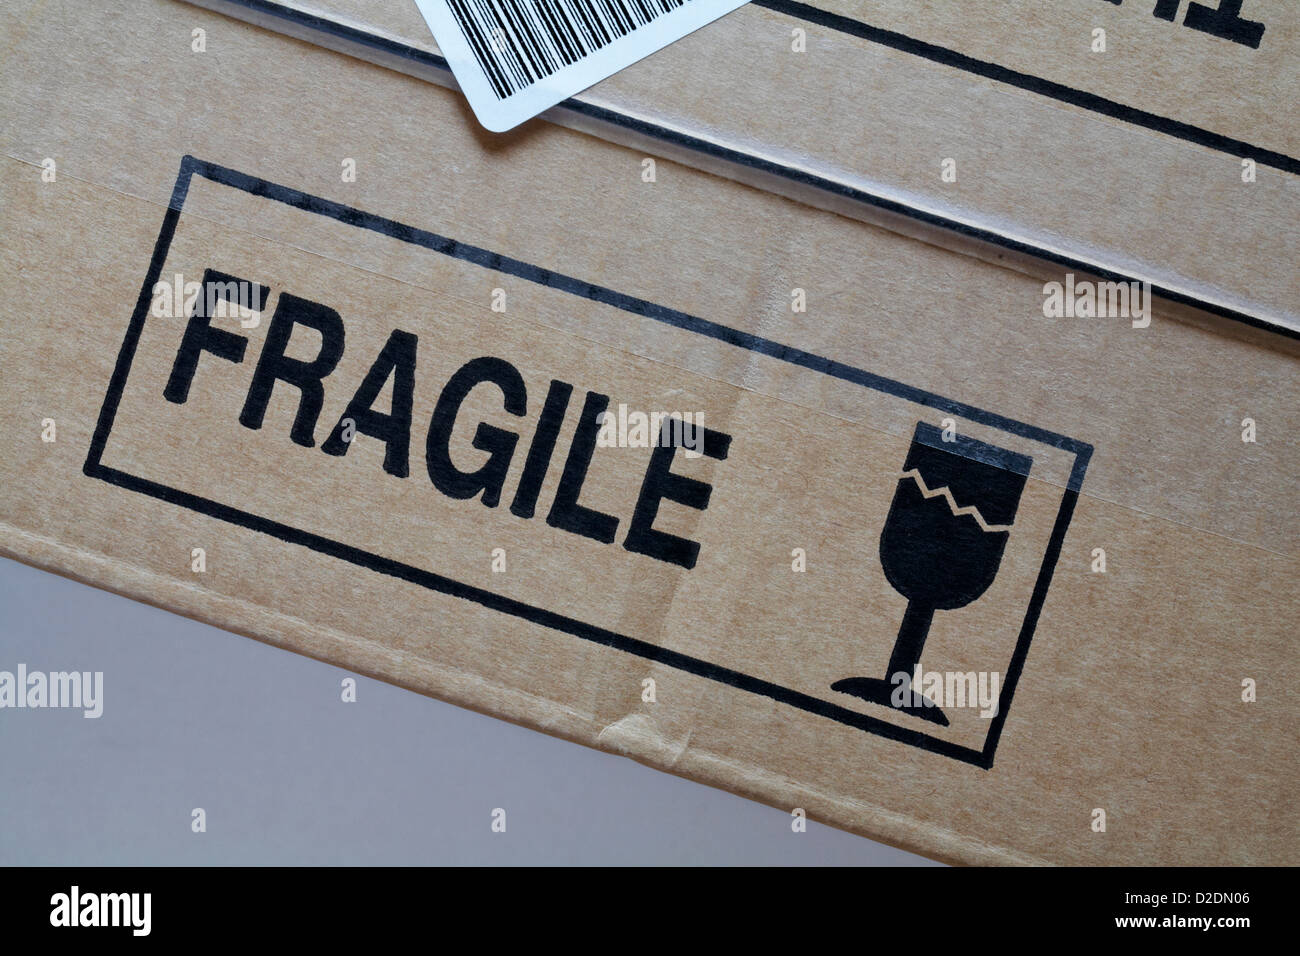 Fragile glass stamped on brown cardboard box Stock Photo